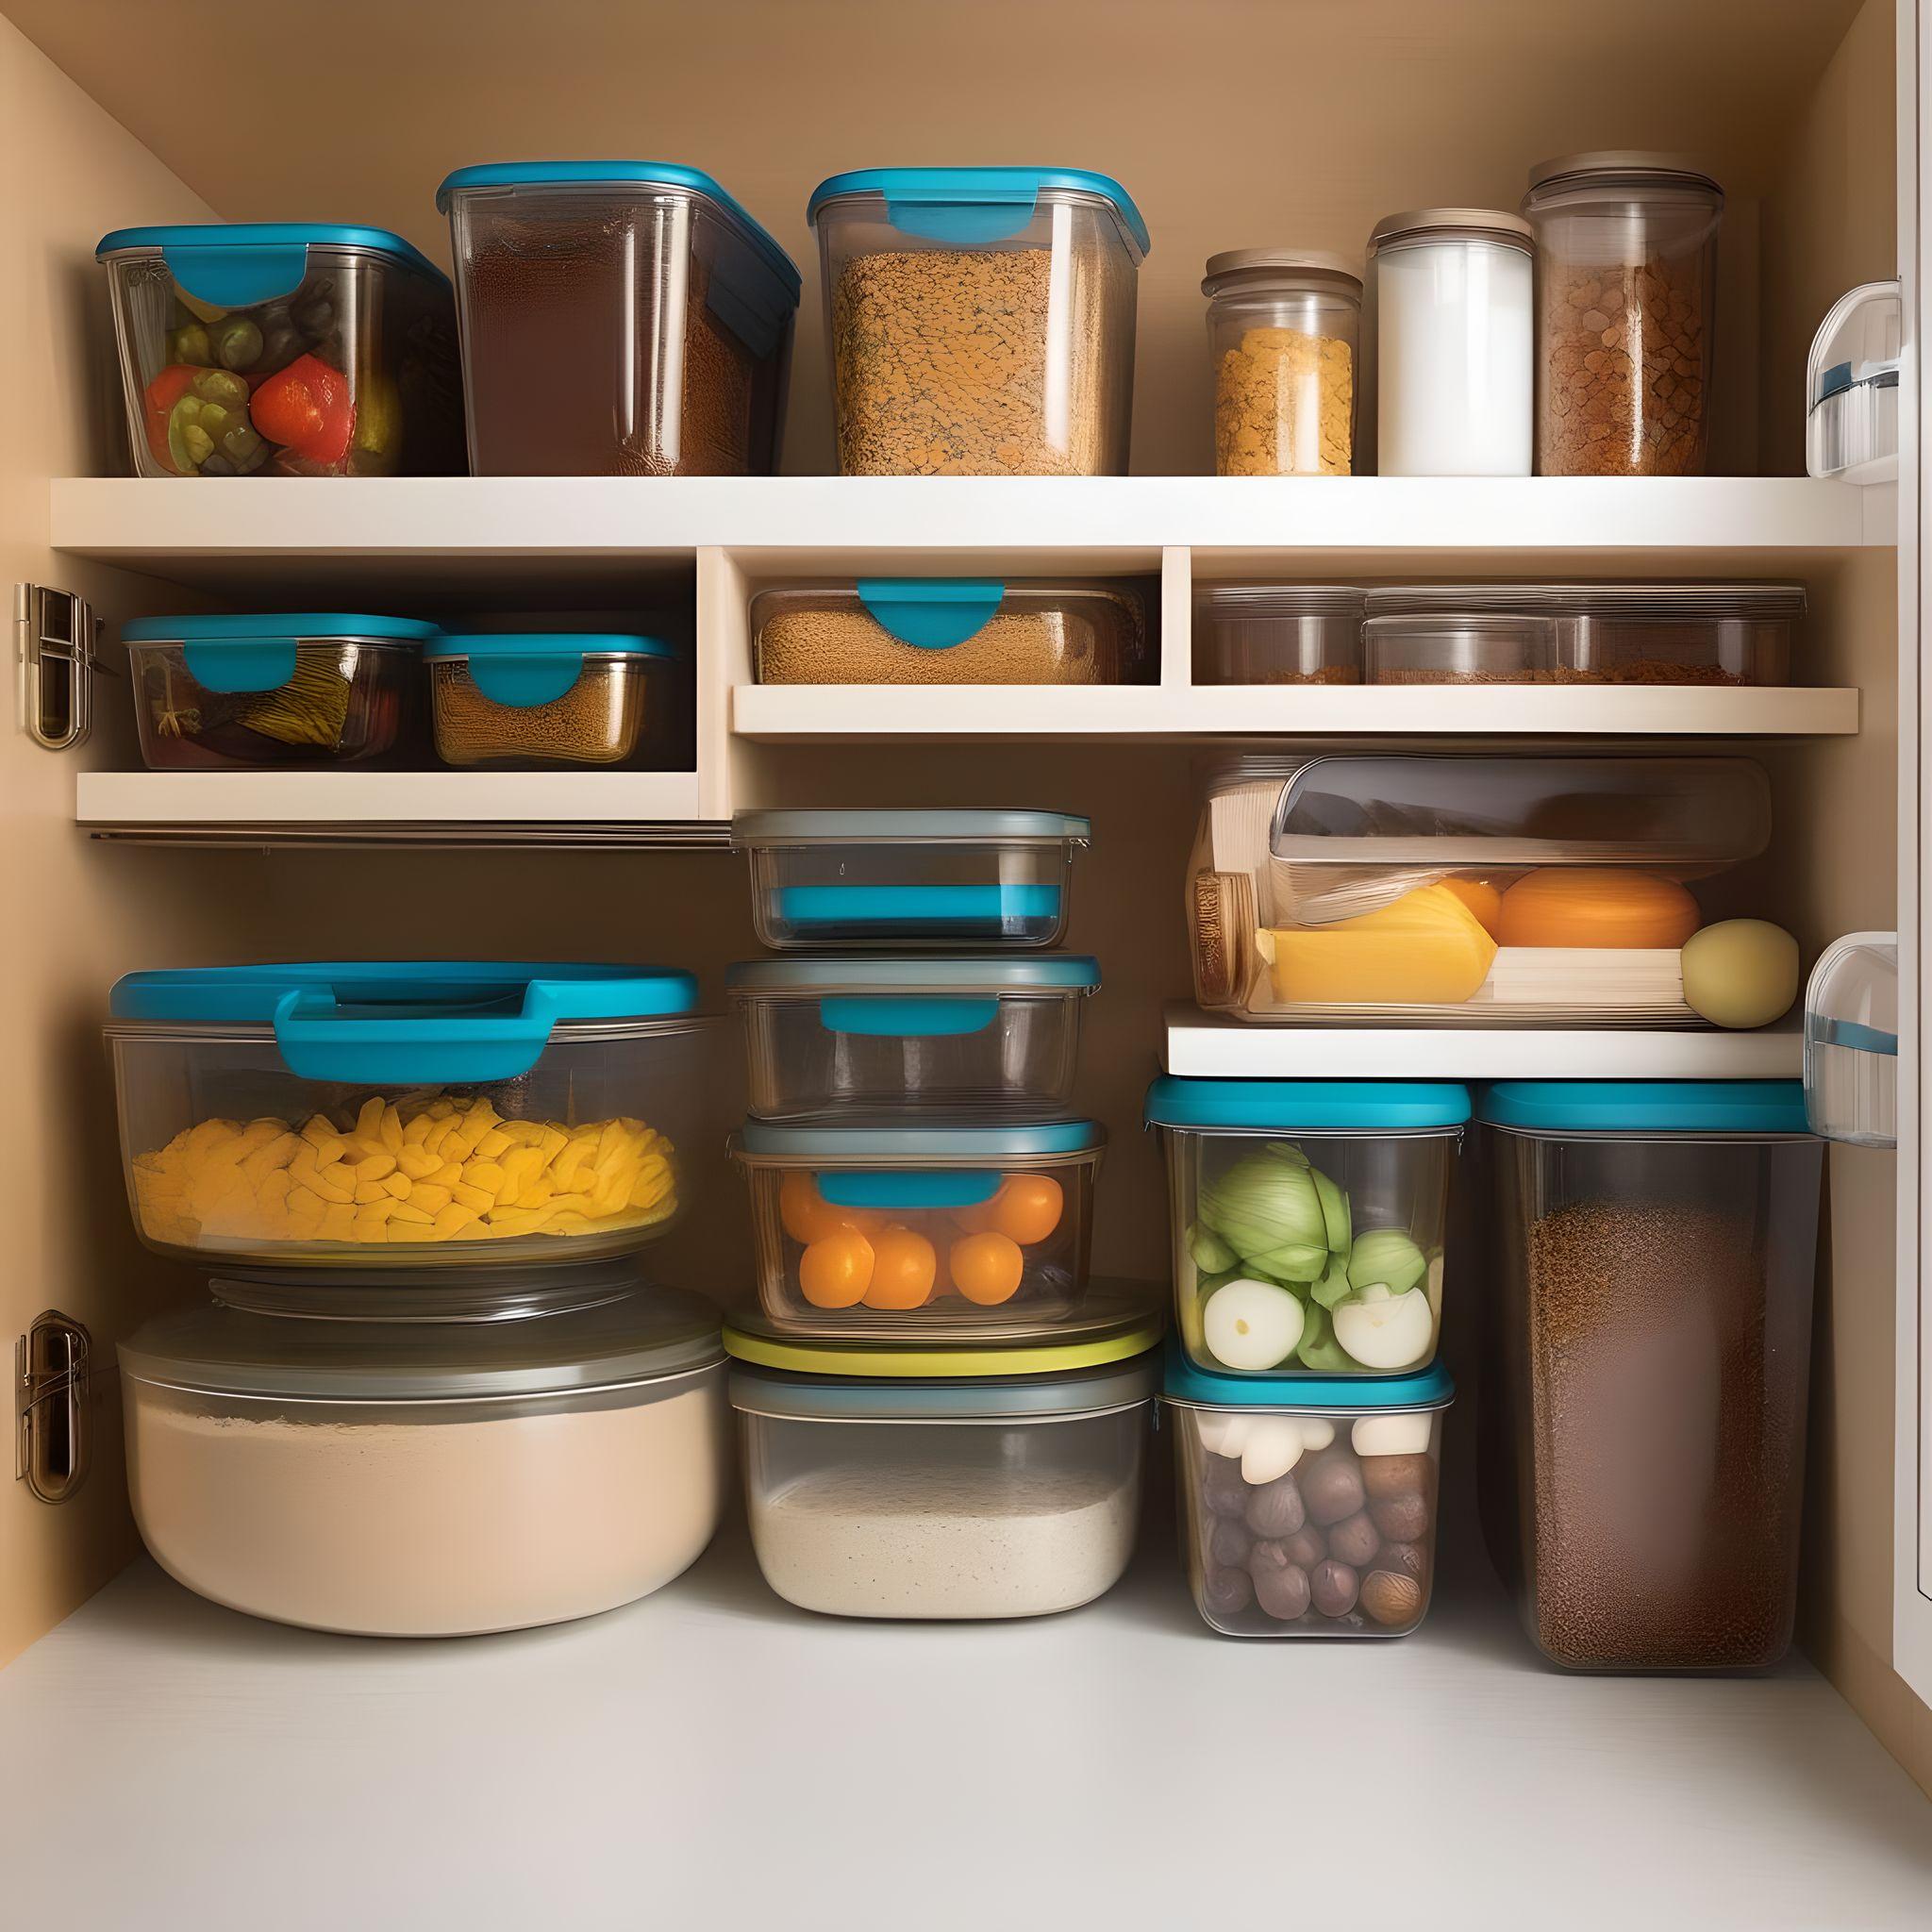 The Clear Choice: Why Plastic Containers Are Essential for Food Safety